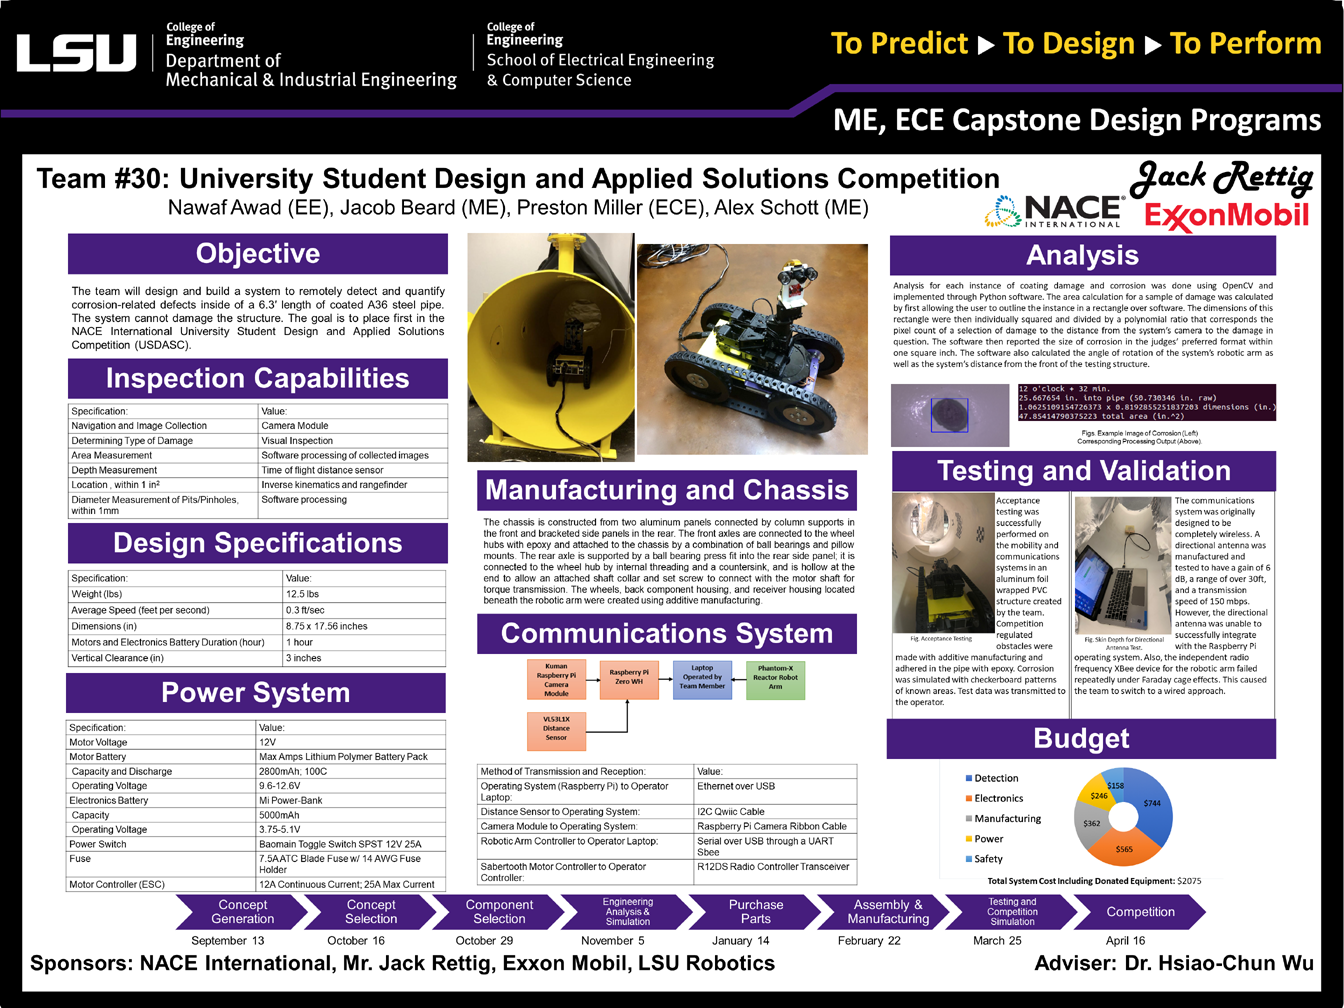 Project 30: University Student Design and Applied Solutions Competition (USDASC) (2019)